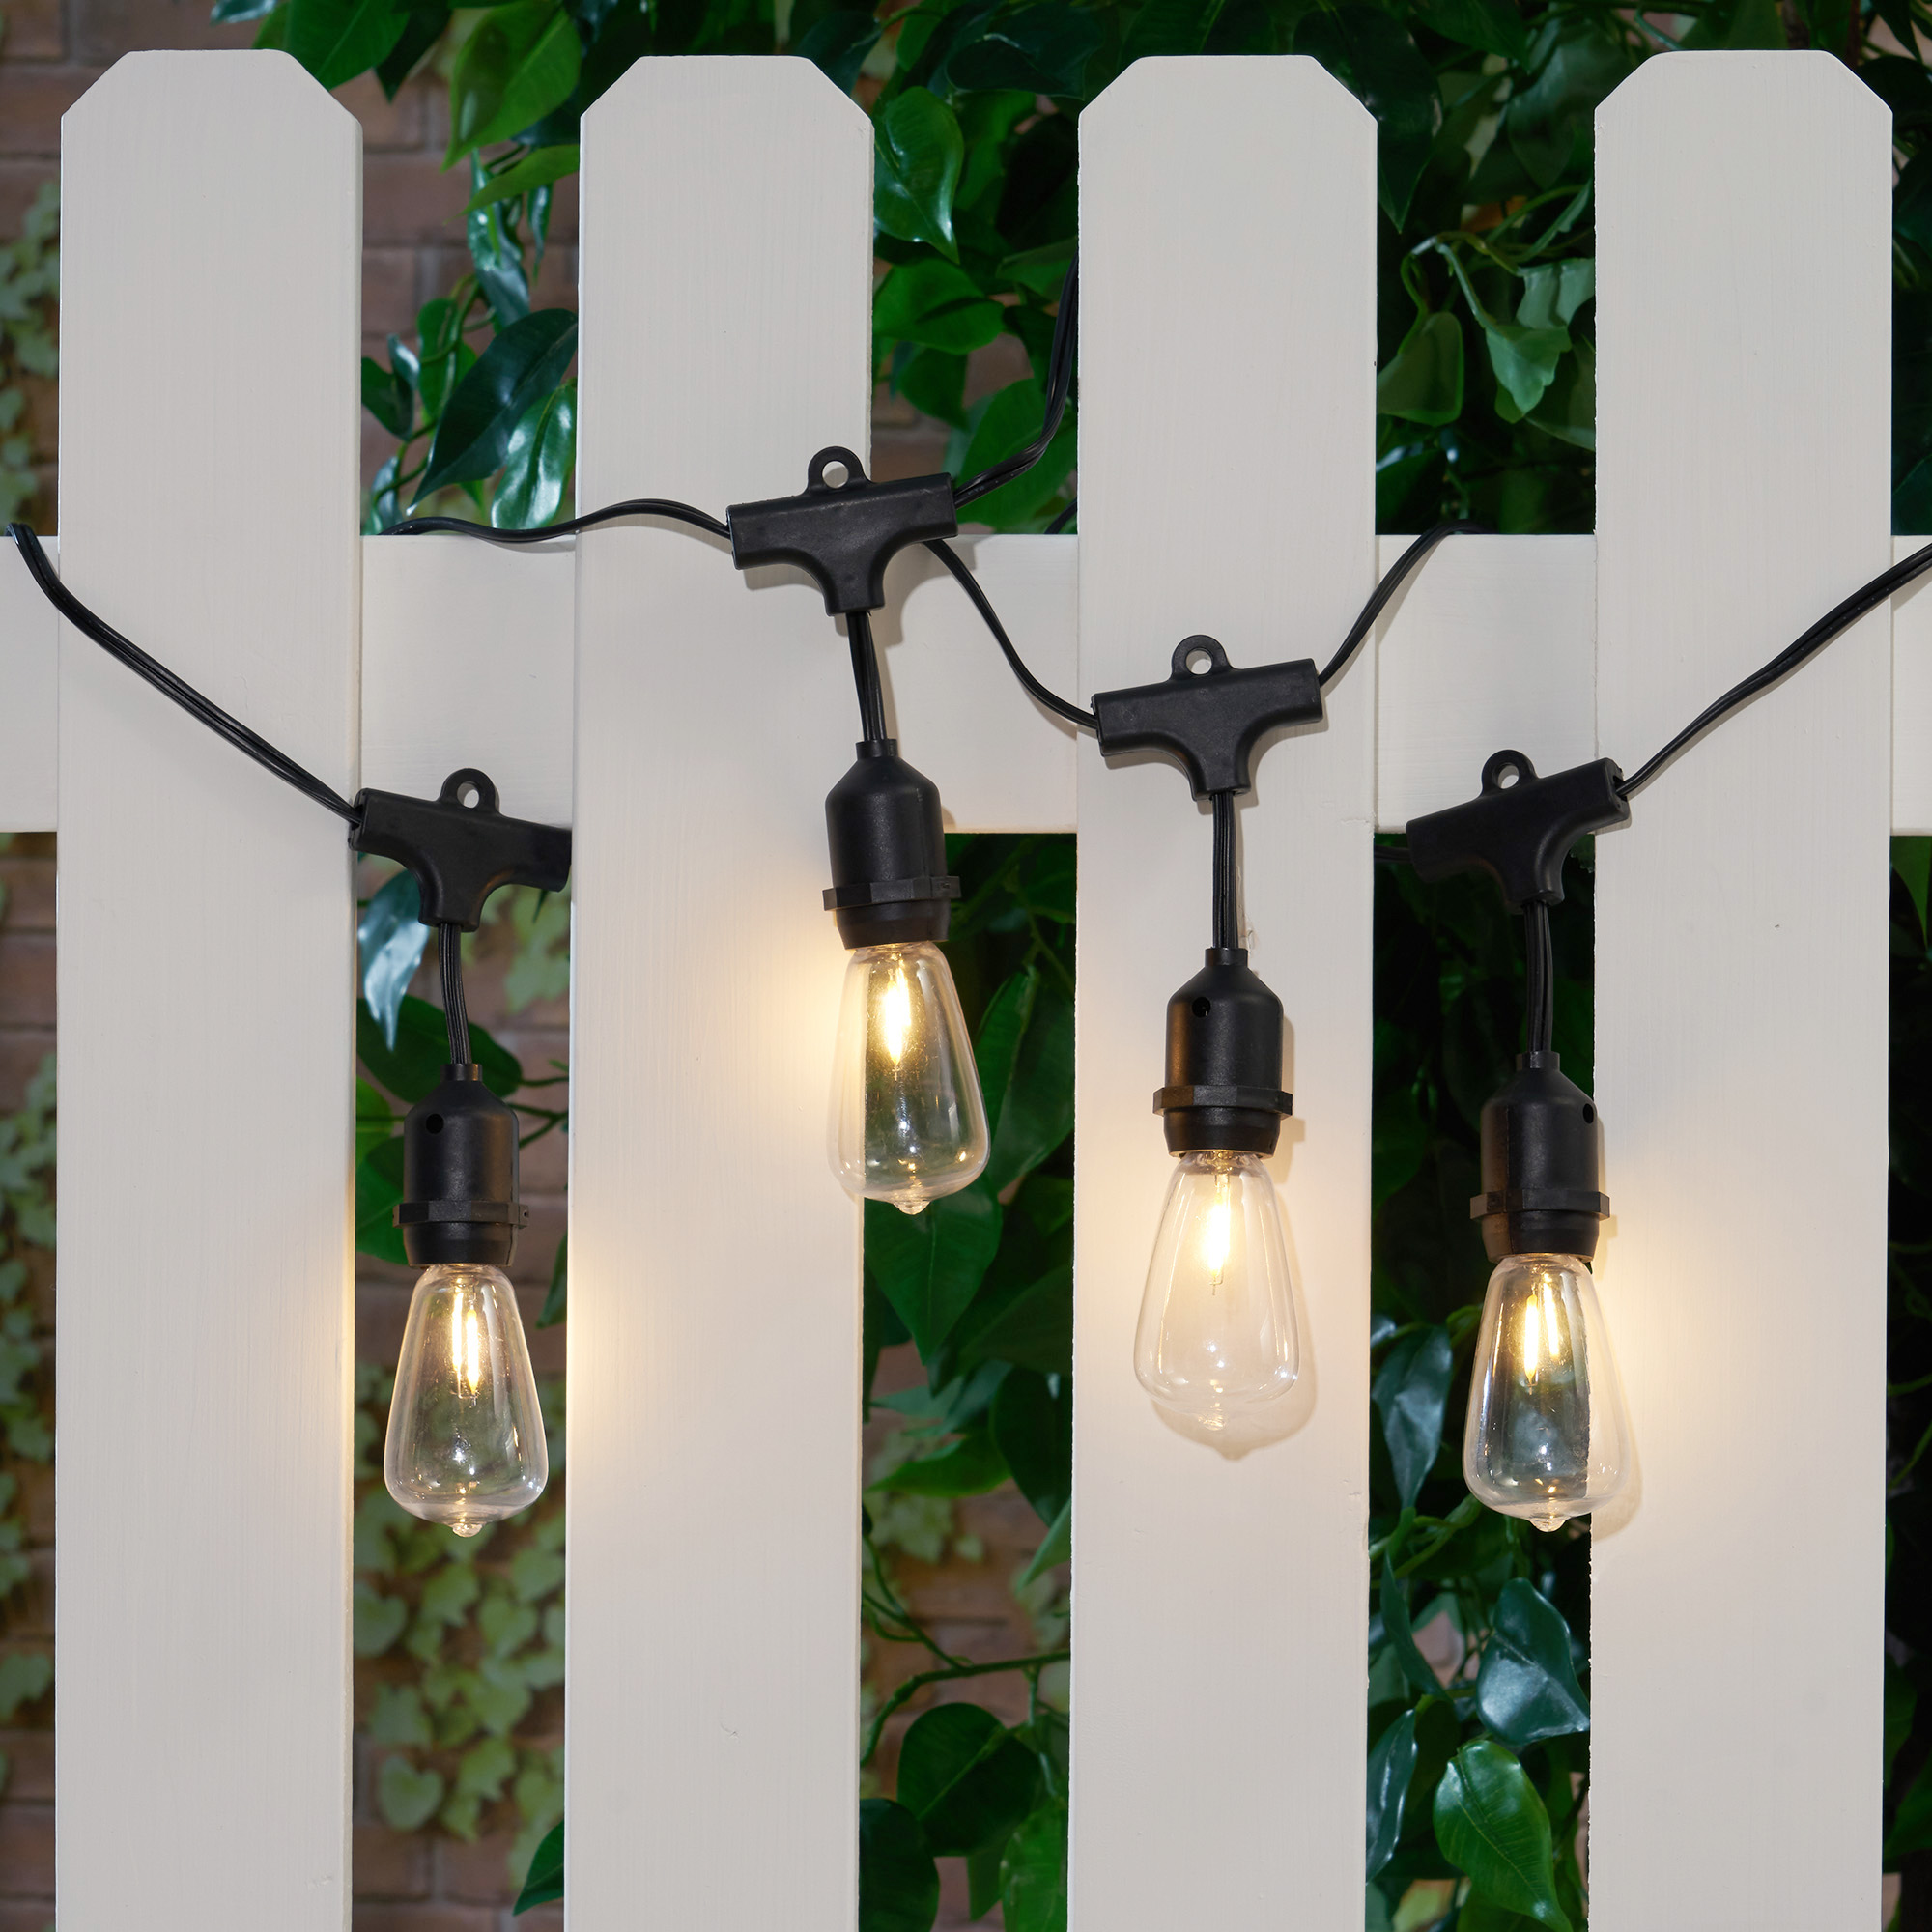 Better Homes & Gardens 15-Count Shatterproof Edison Bulb Outdoor String Lights with Black Wire - image 4 of 8